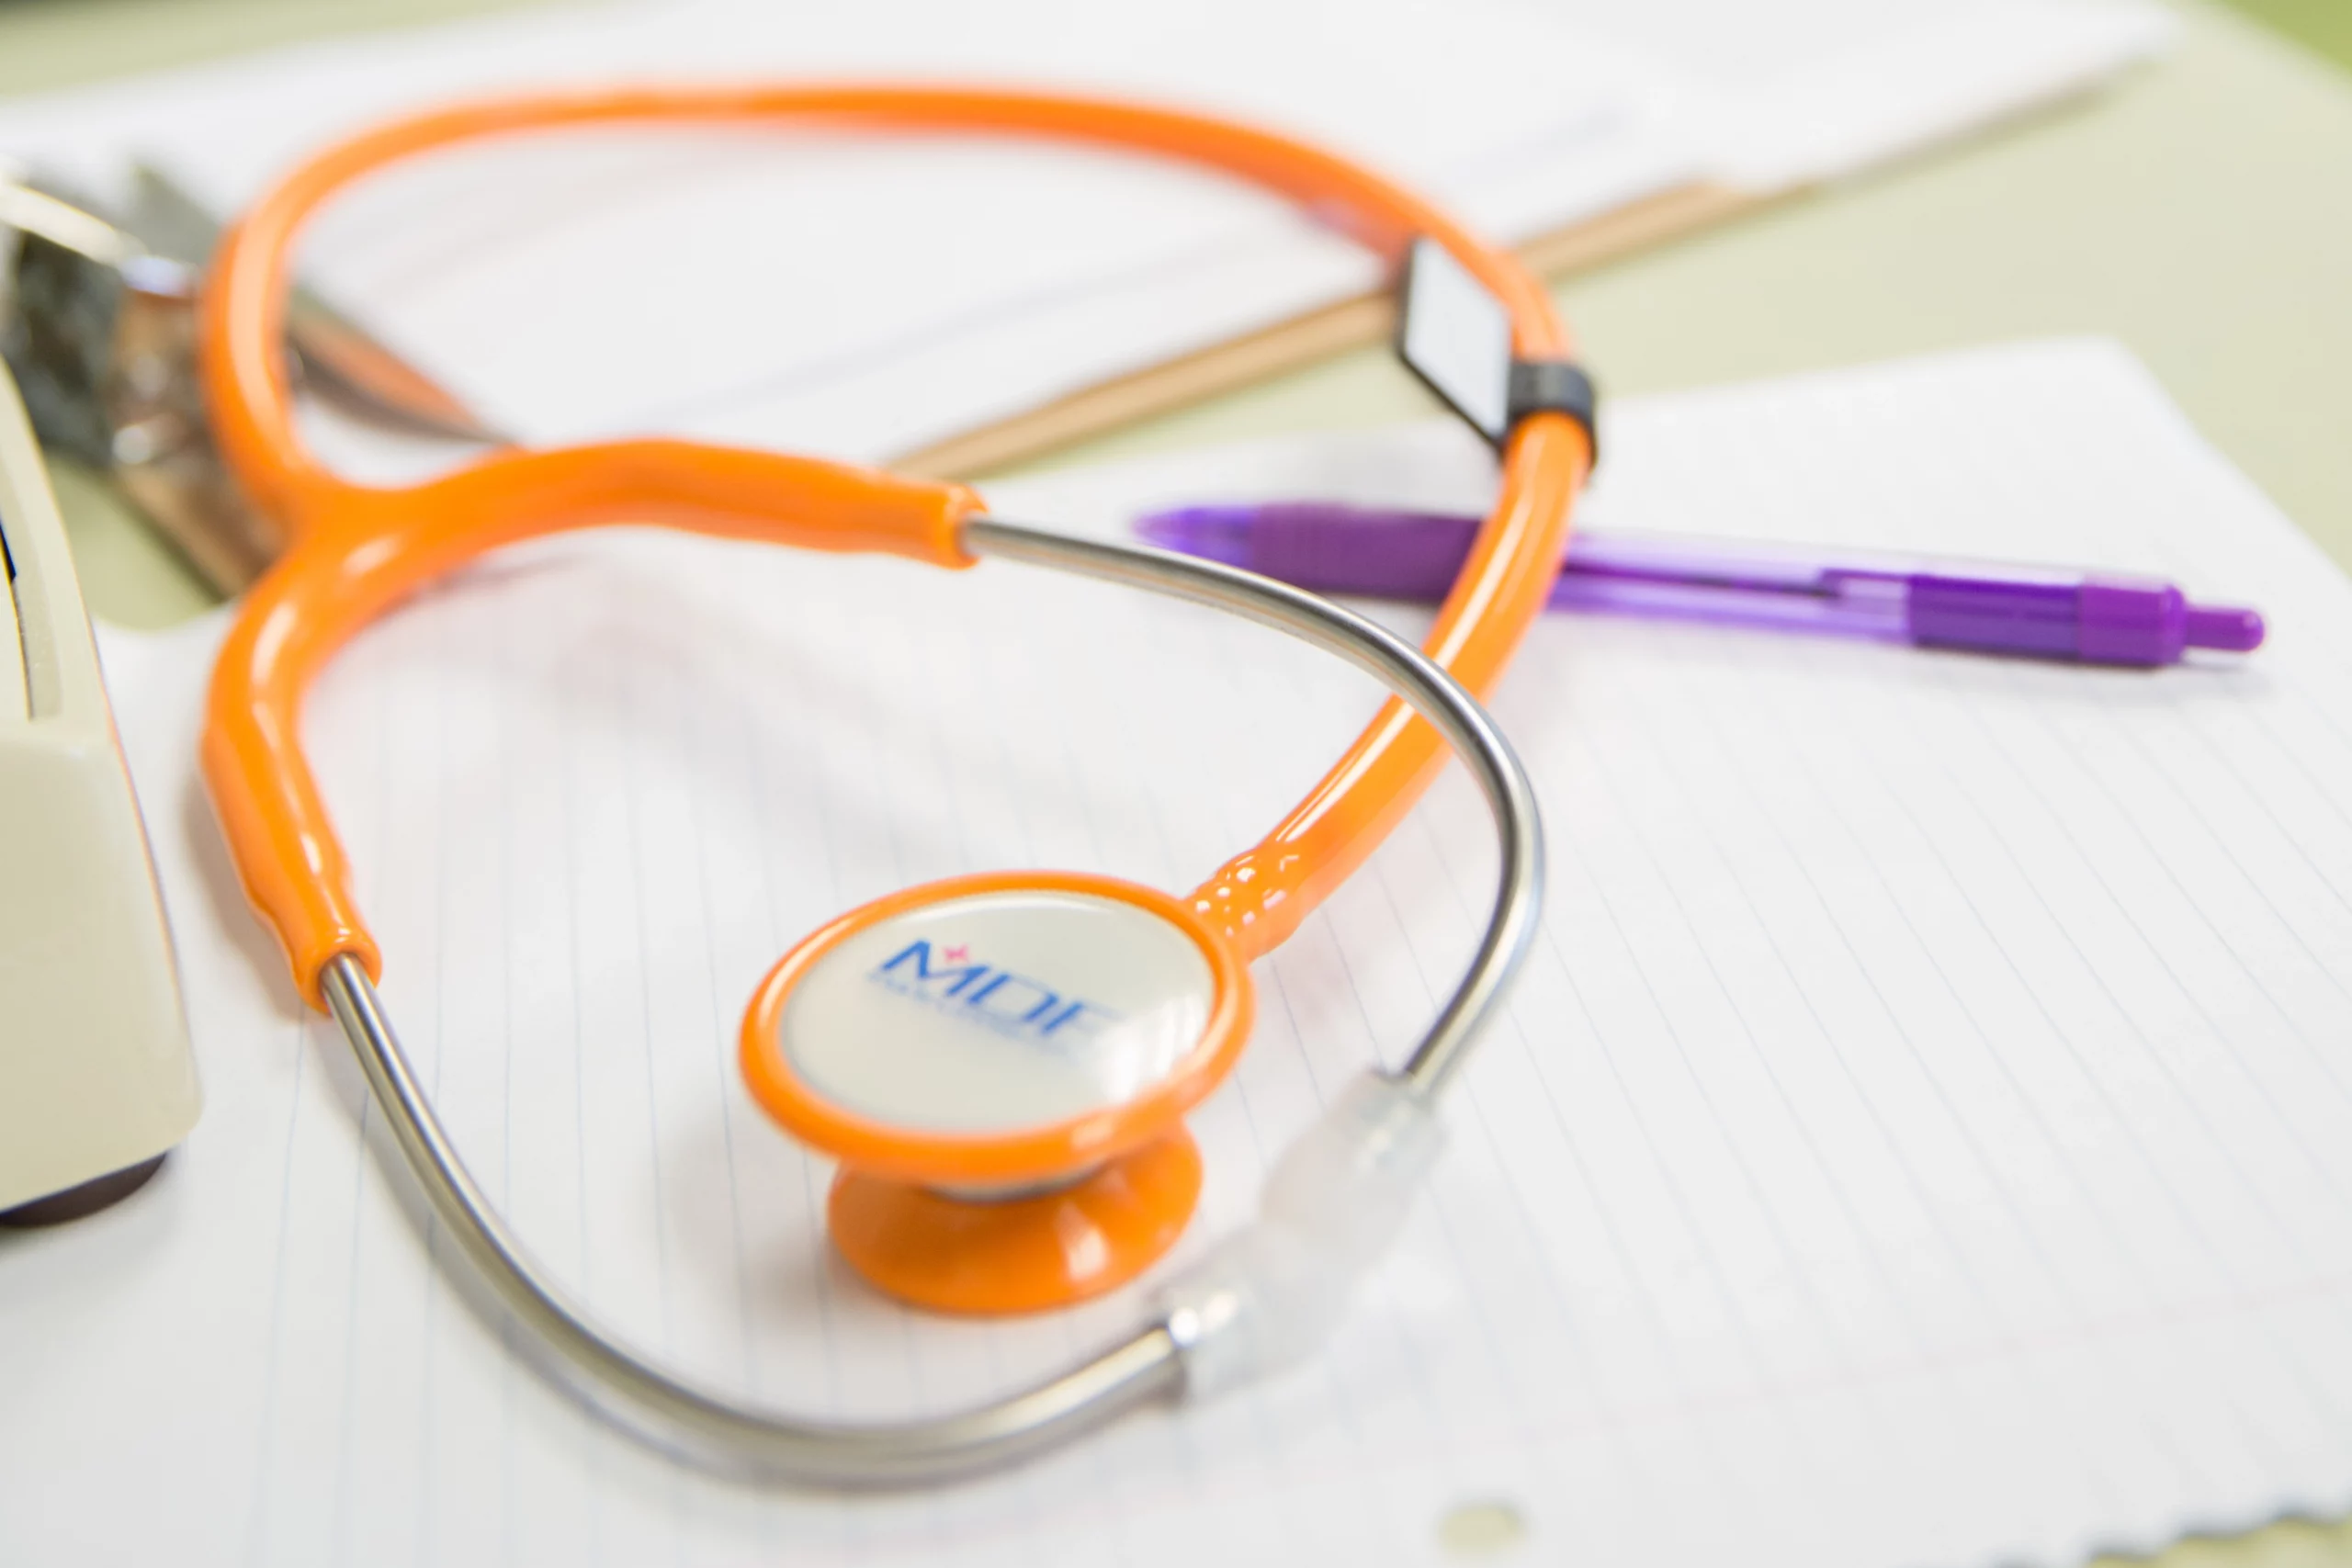 An orange stethoscope lying on sheets of paper